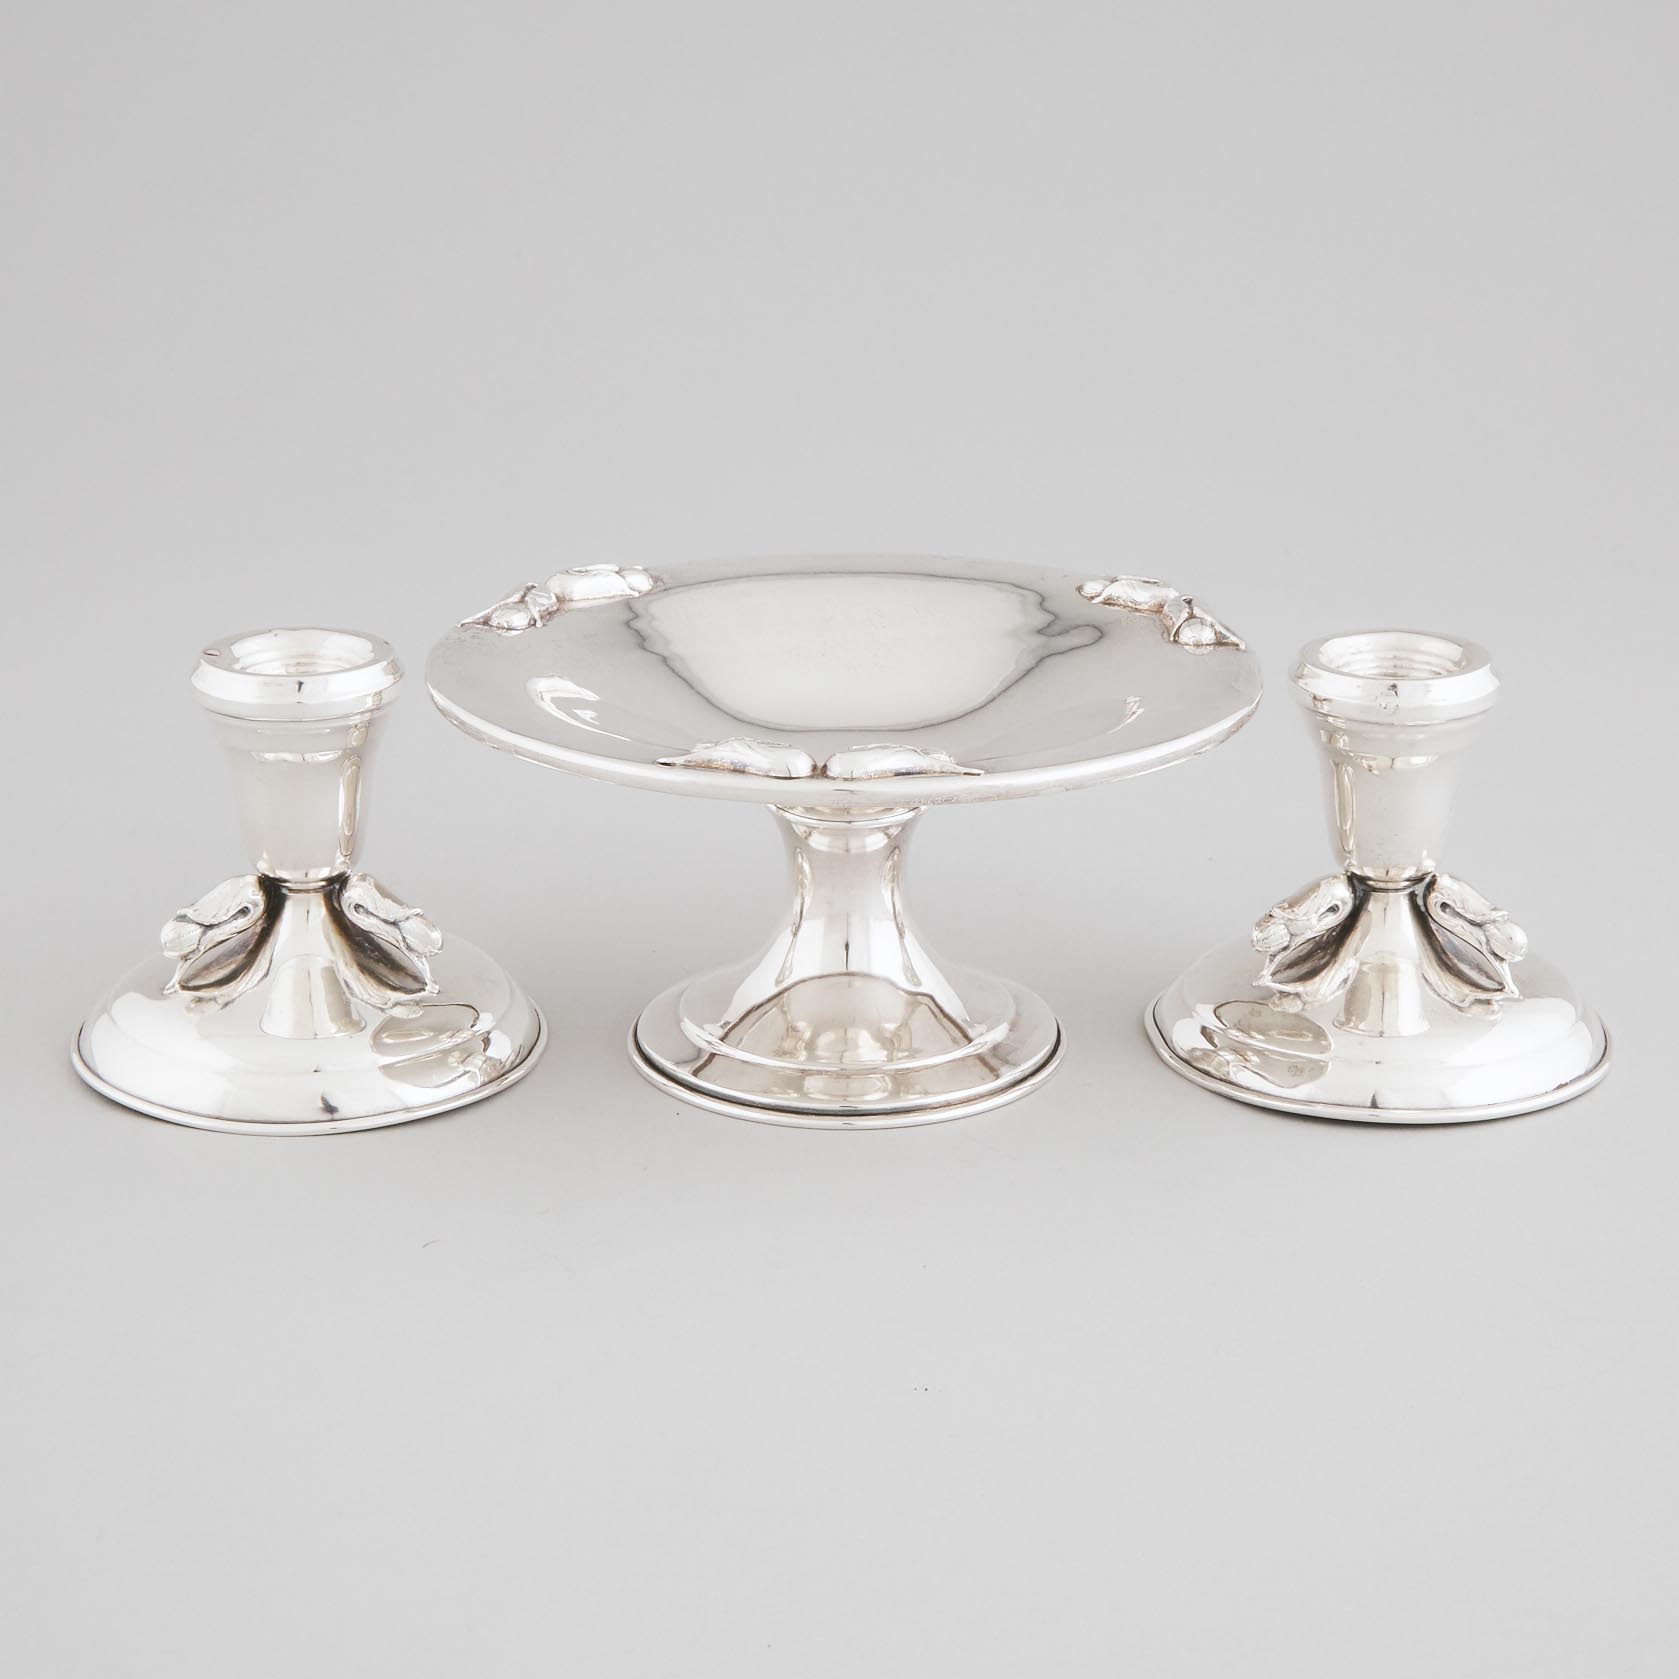 Pair of Canadian Silver Low Candlesticks and a Footed Comport, Poul Petersen, Montreal, Que., mid-20th century